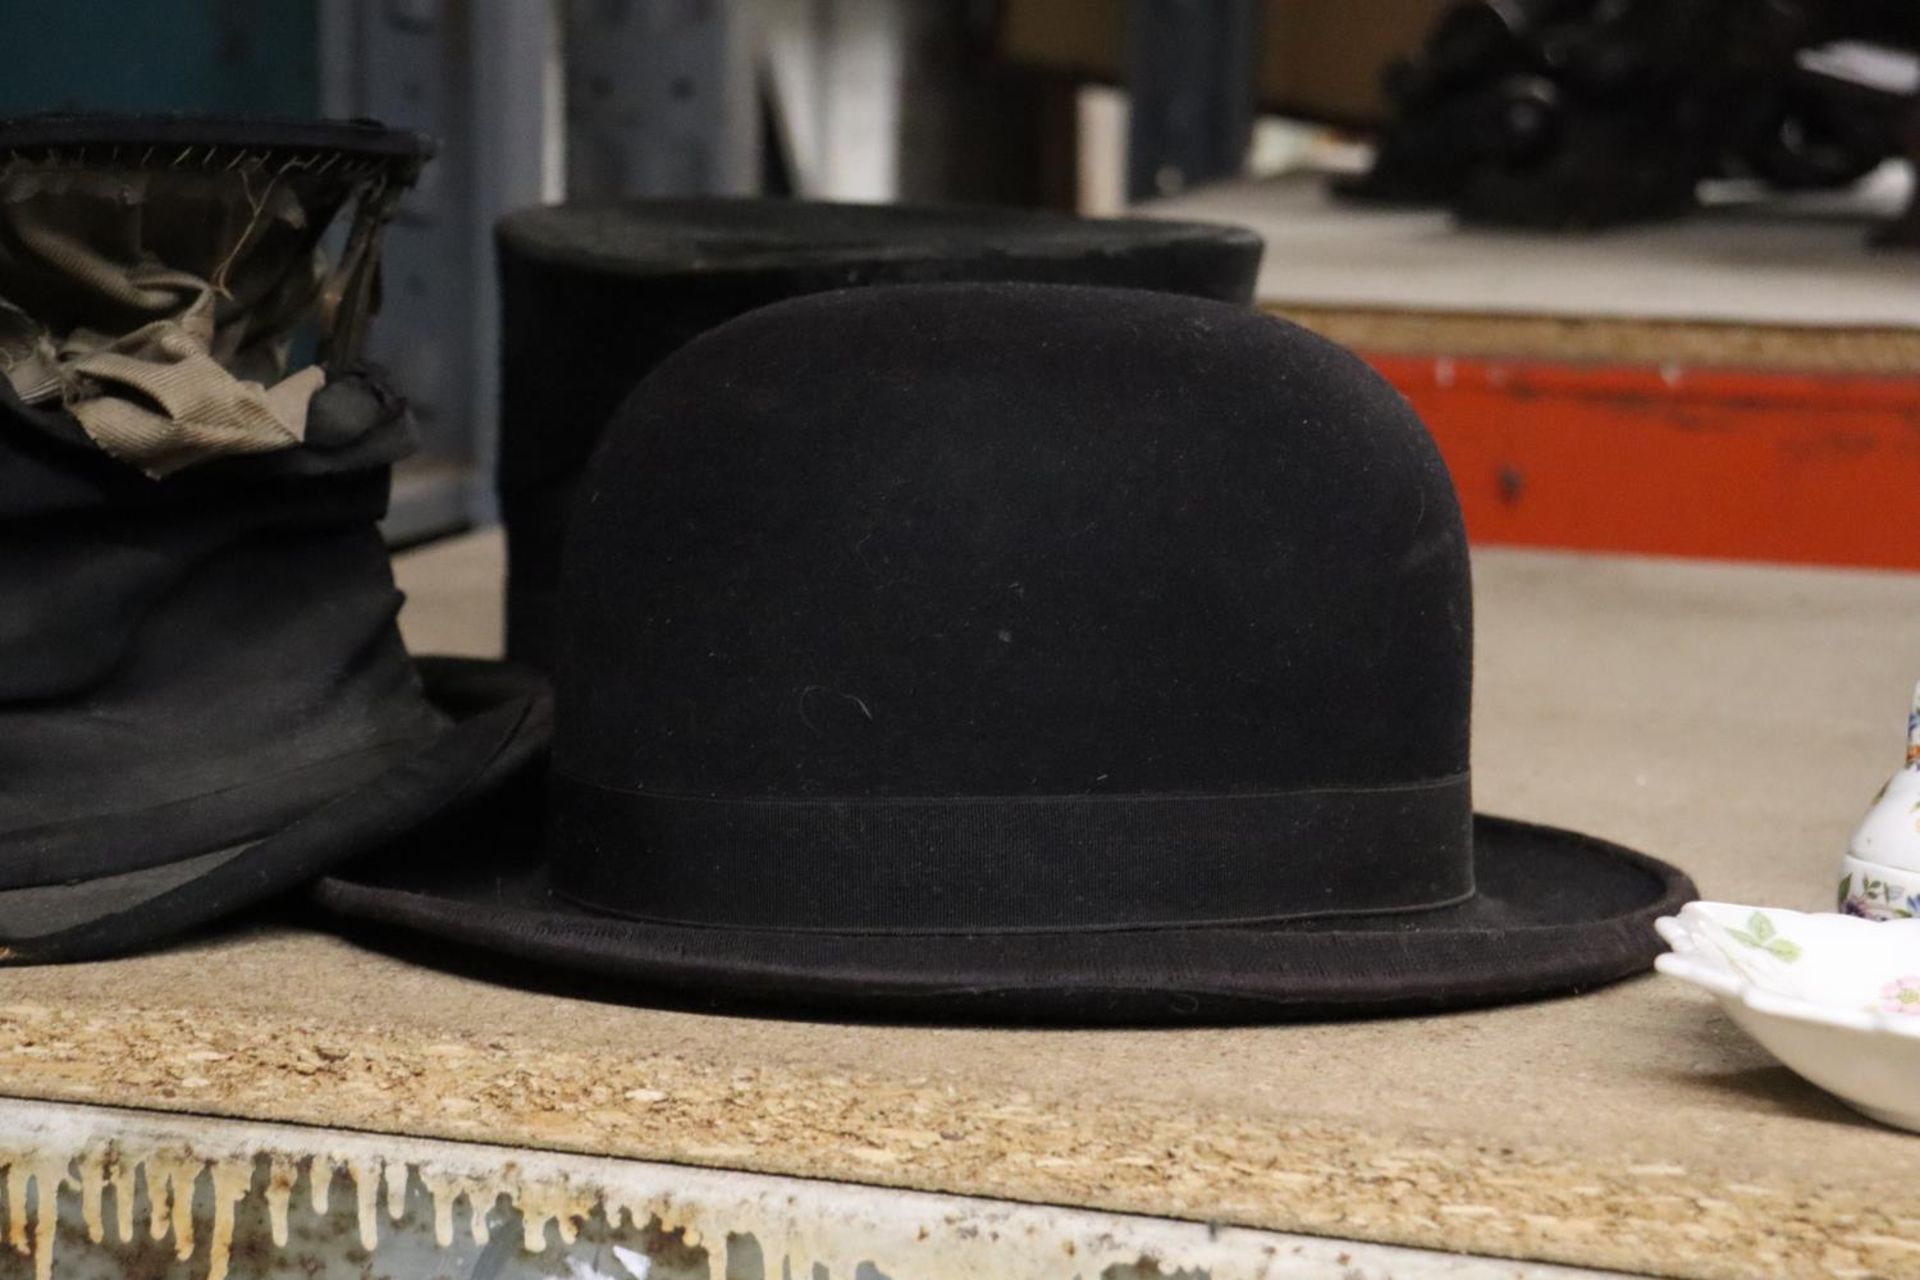 TWO VINTAGE TOP HATS AND A BOWLER HAT - TOP HATS A/F - Image 3 of 6